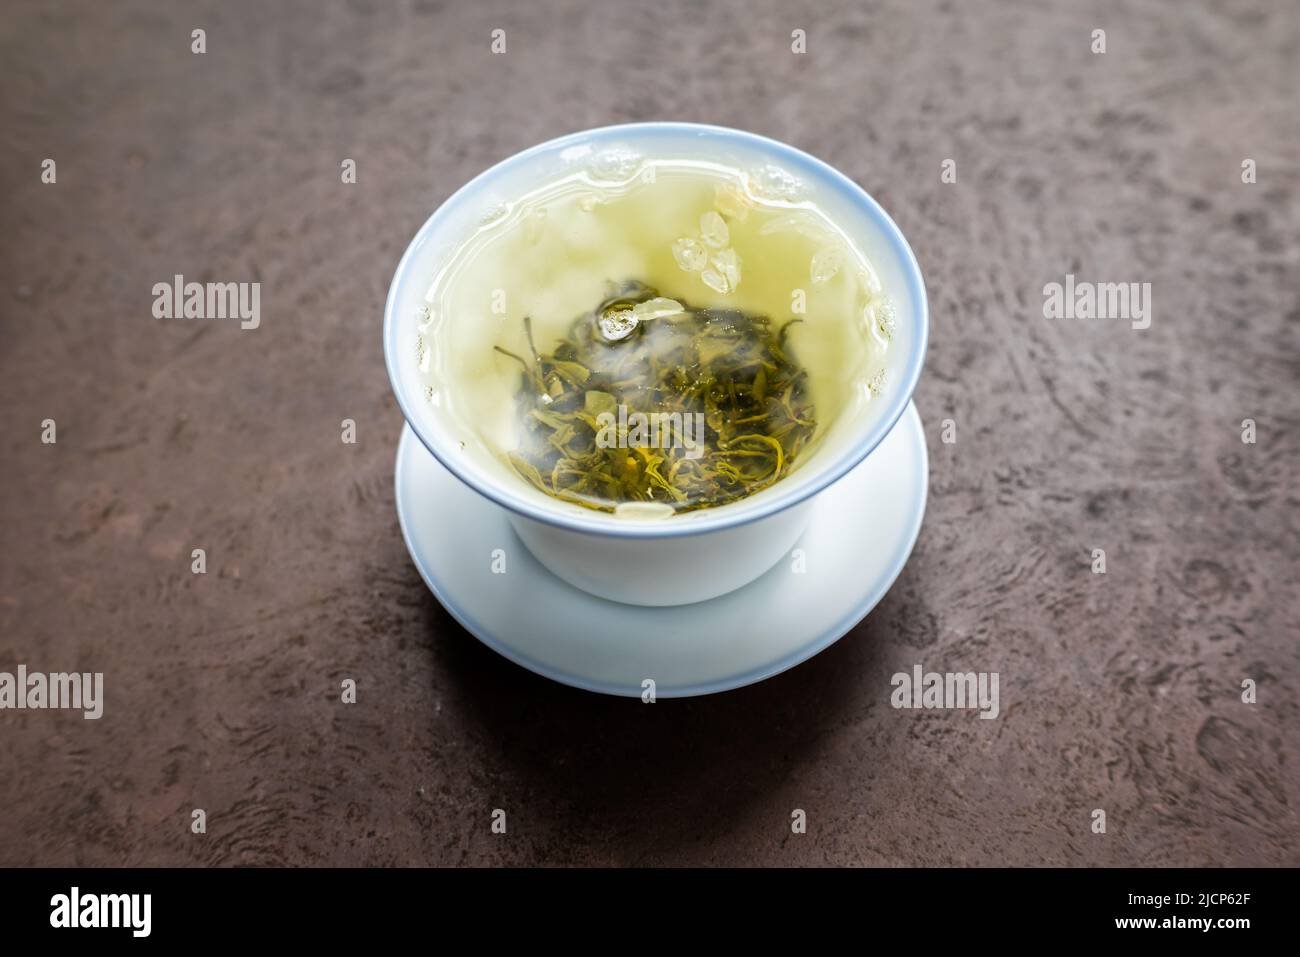 Cup of green tea on a stone table close-up view Stock Photo